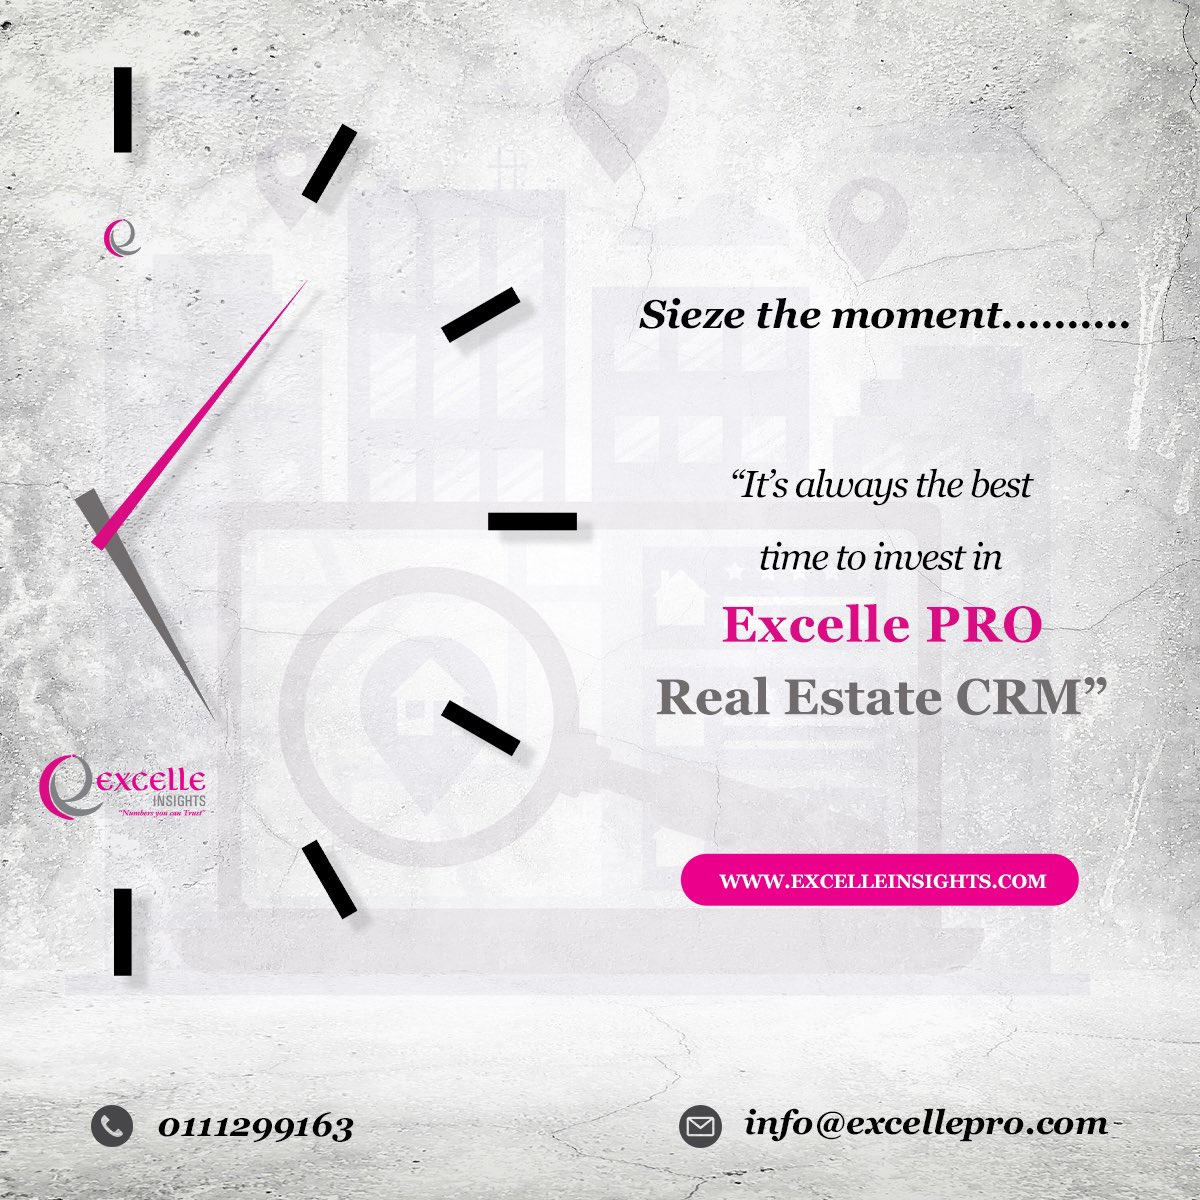 The clock is ticking, and the best time to invest in Excelle PRO CRM is now⏰💪 
Experience the power of efficiency and watch your real estate endeavors thrive! #ExcellePROCRM #InvestSmart
'Don't let time slip away #RealEstate #Excelleinsights #realestatecrm #realestate#software